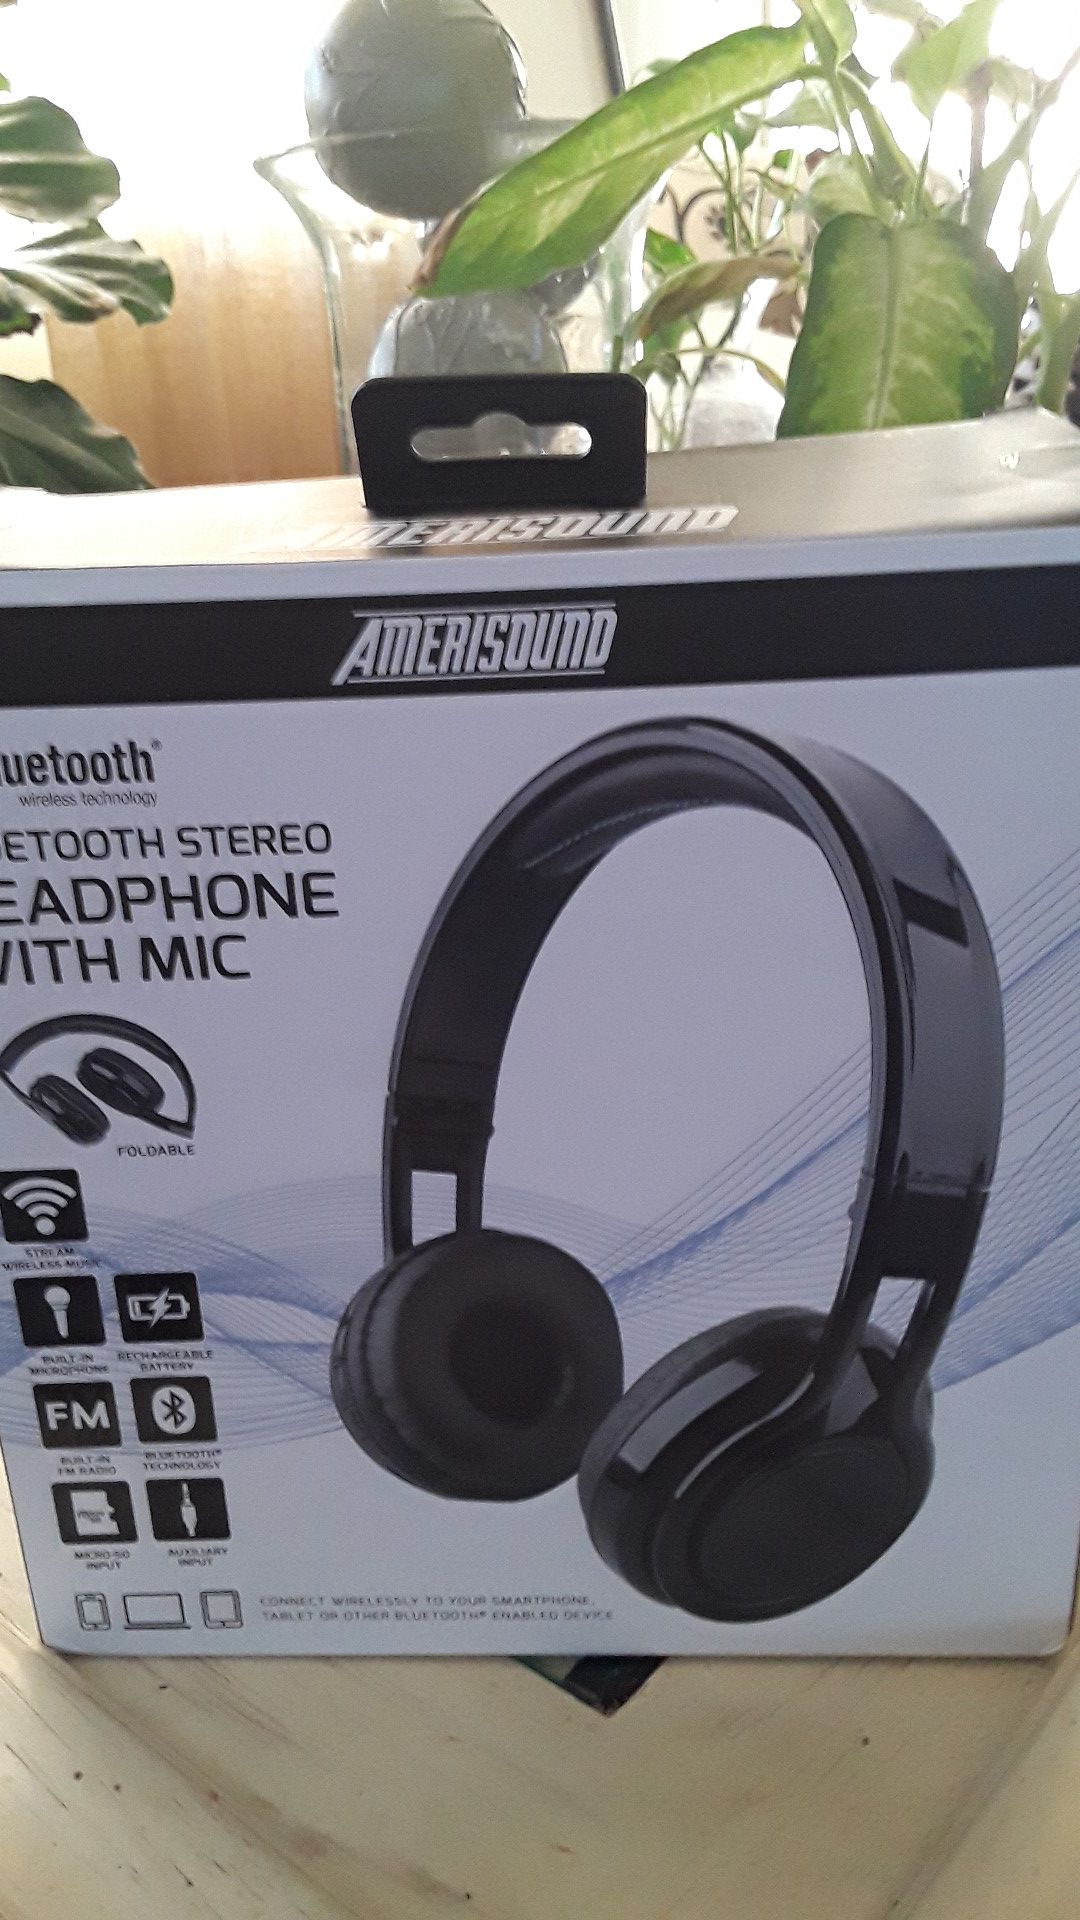 Amerisound bluetooth headphone w/mic perfect for kids not to loud